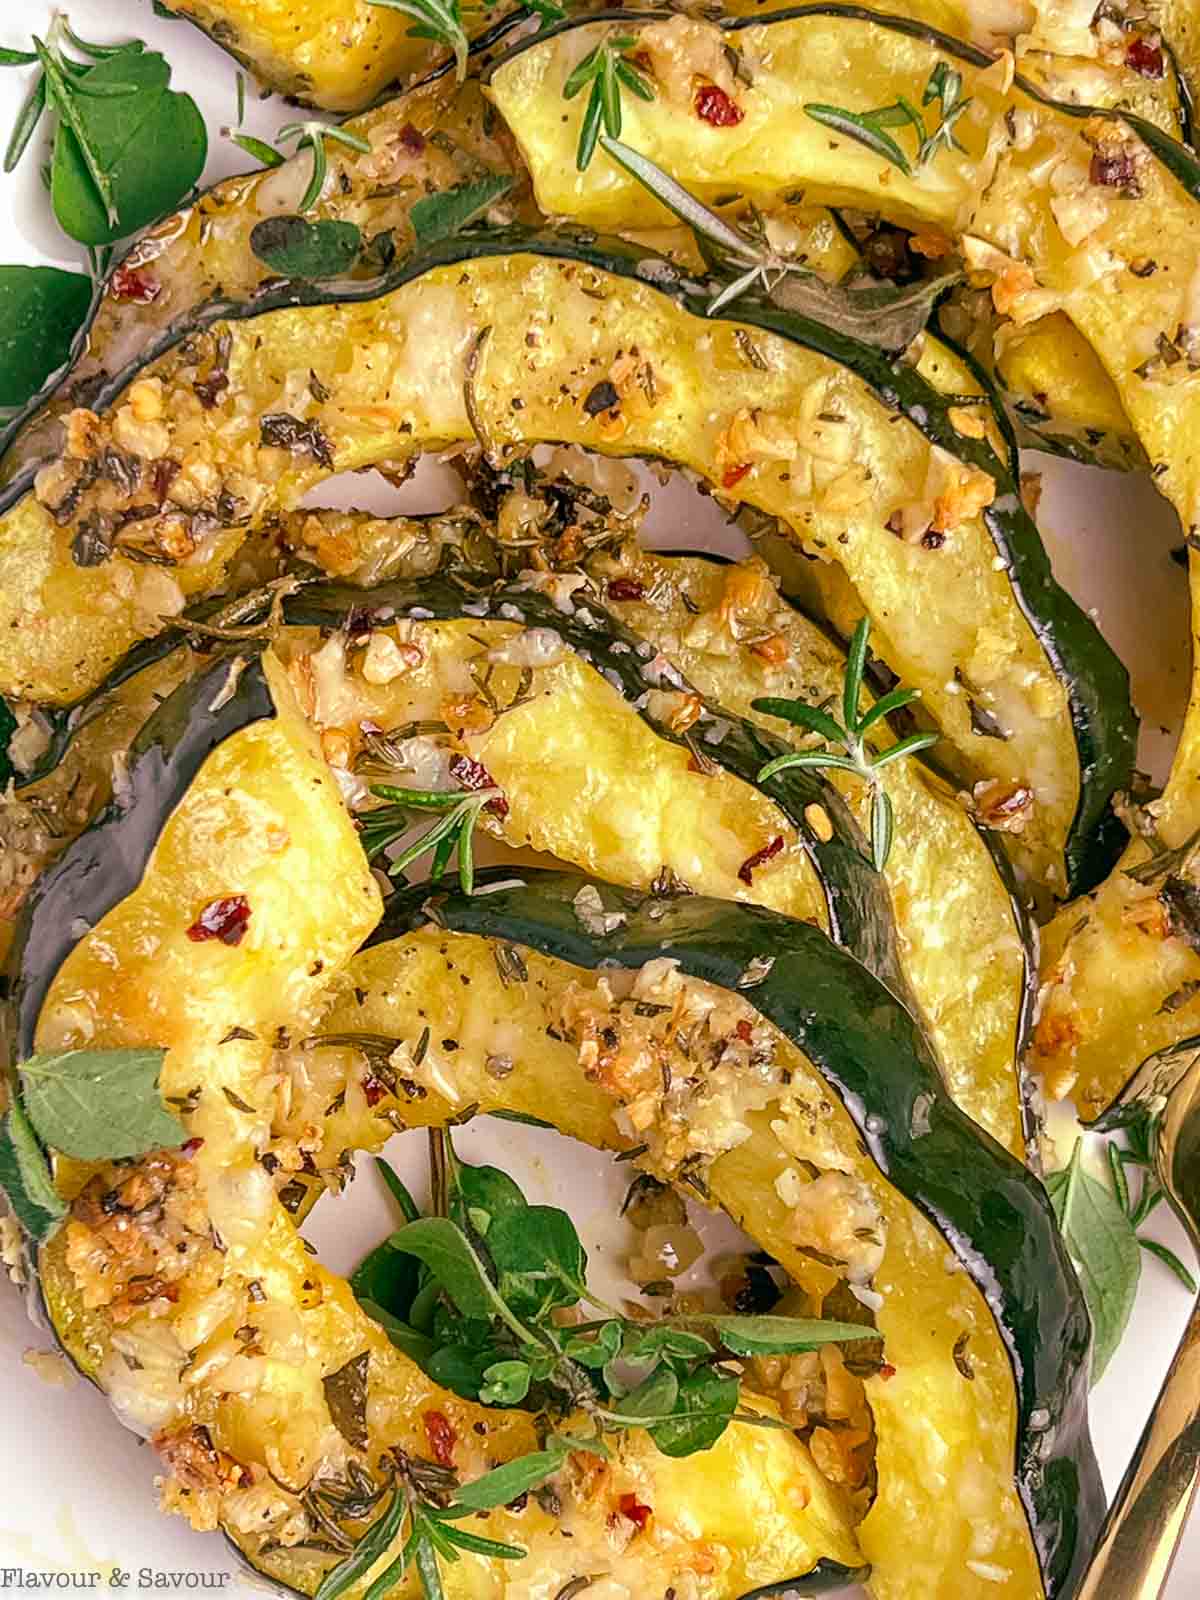 Close up view of slices of roasted acorn squash with garlic, parmesan cheese and fresh herbs.